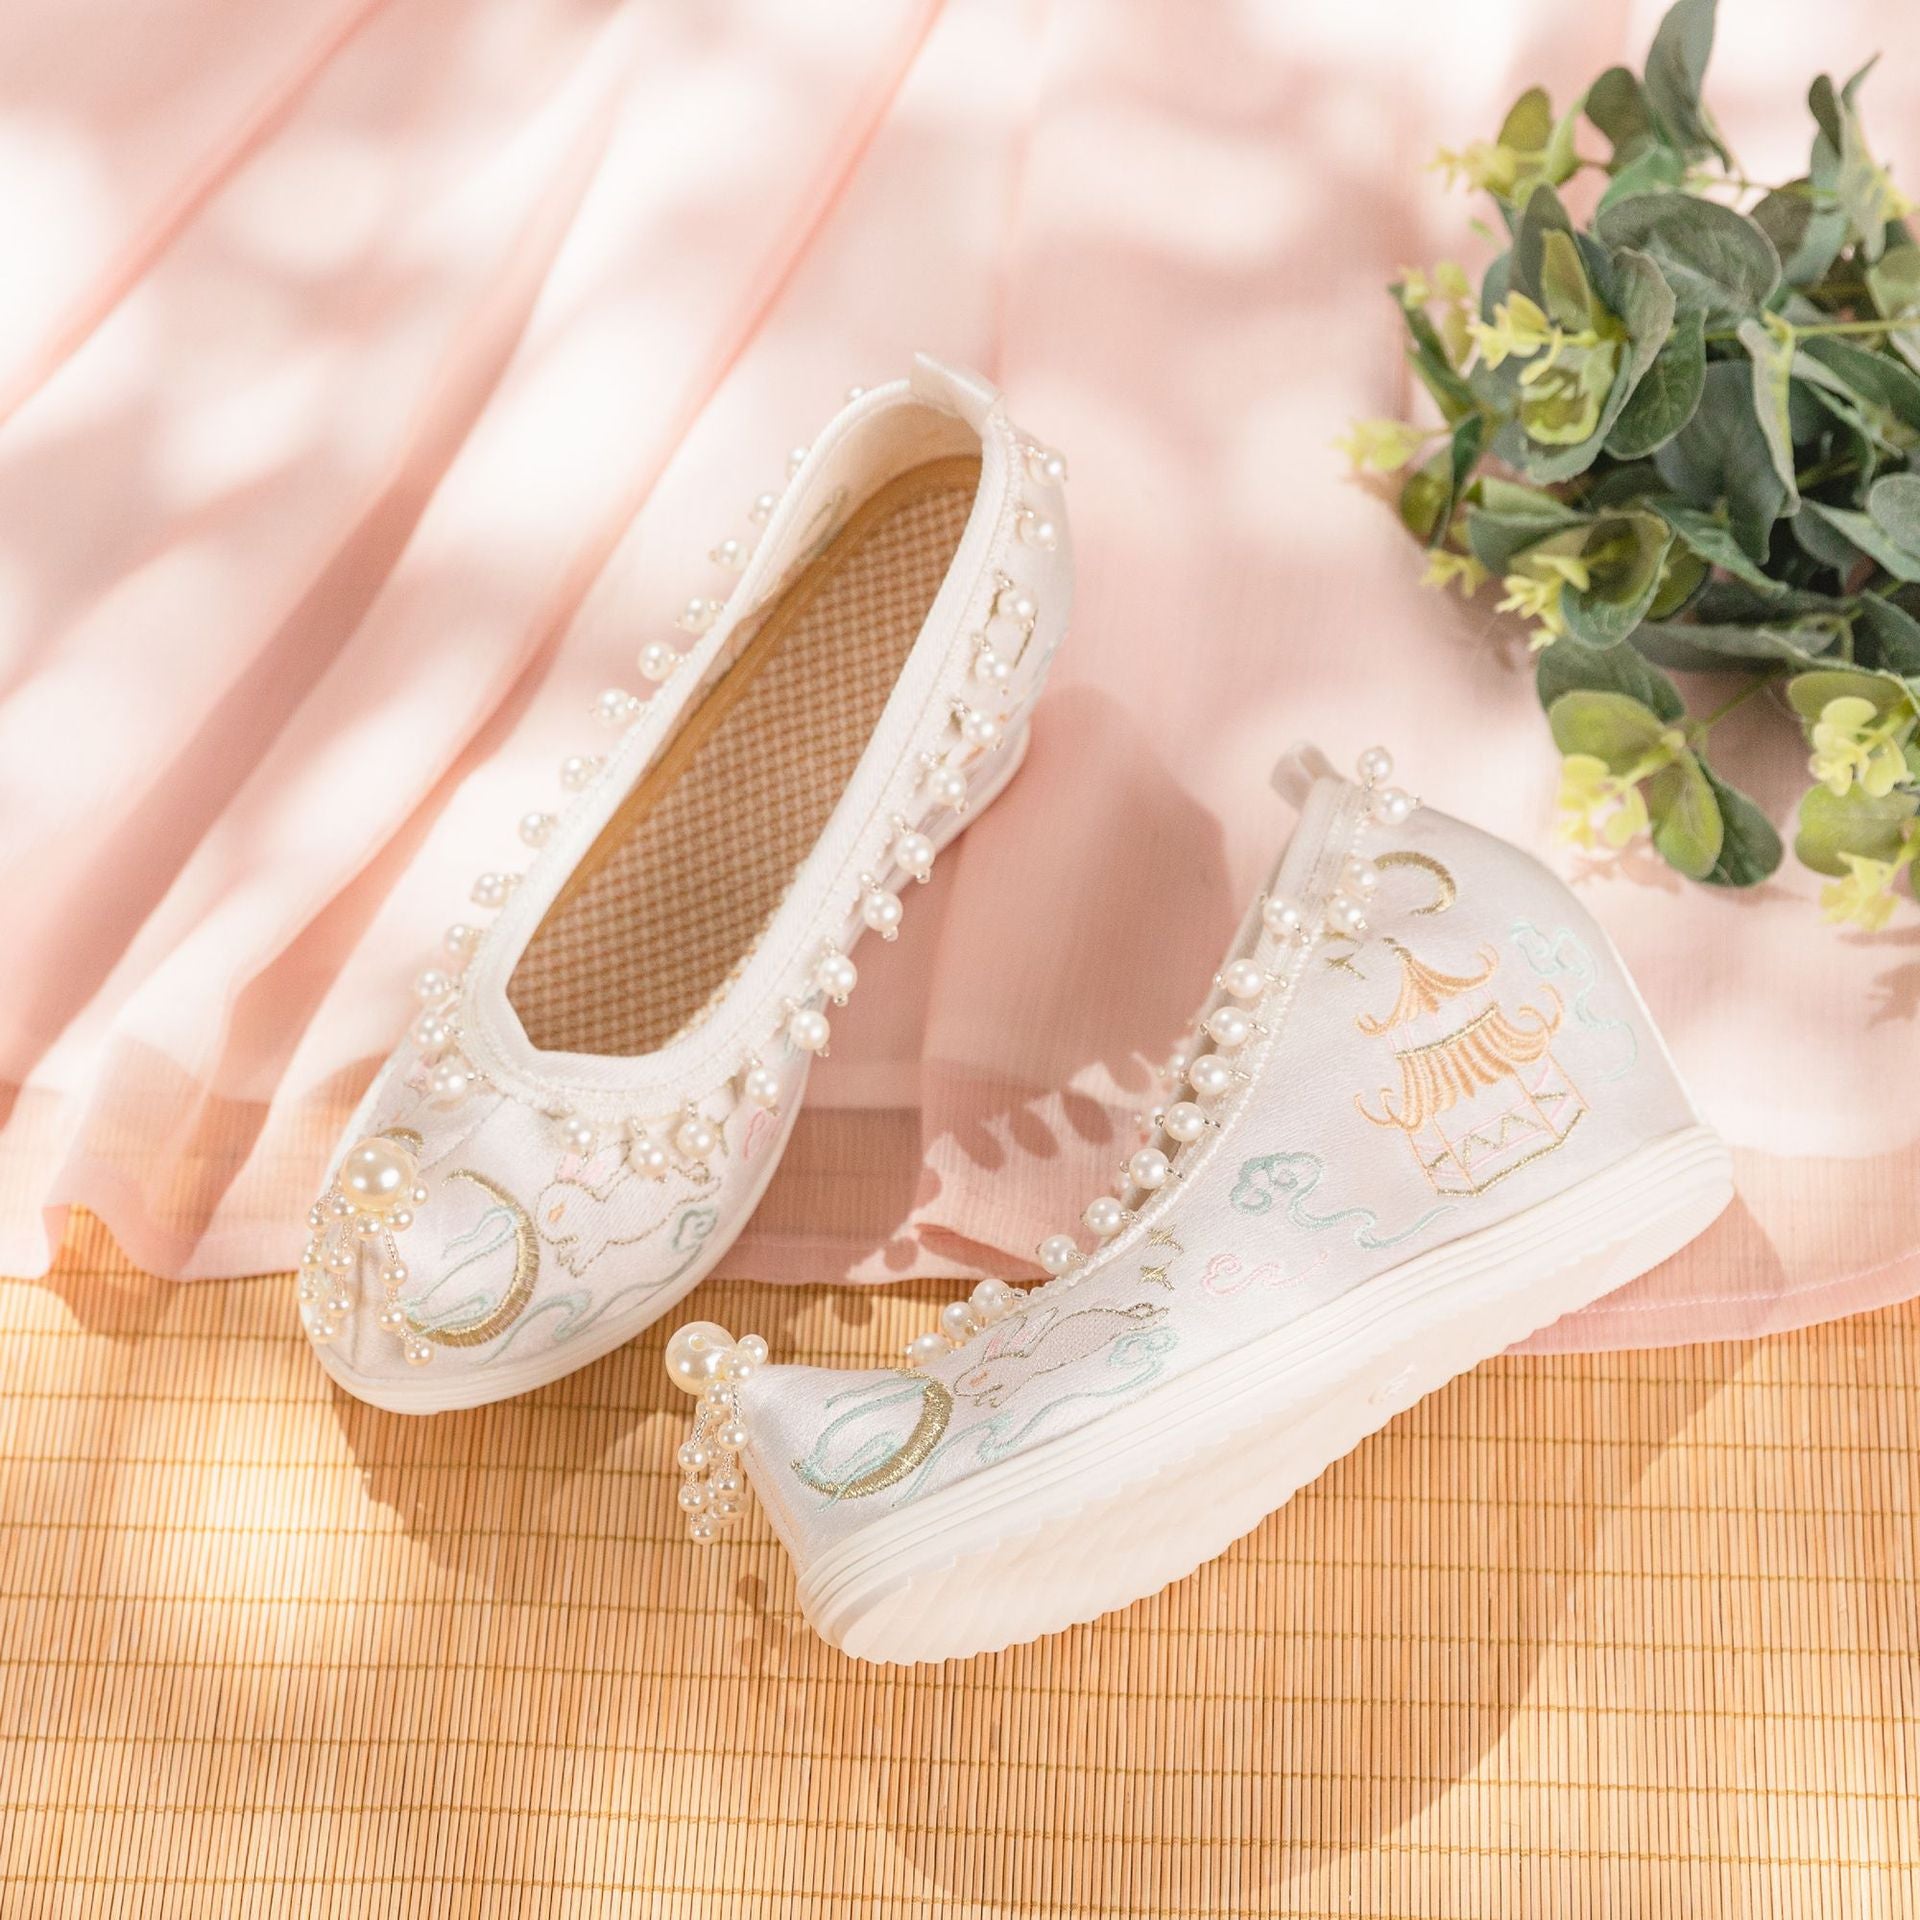 Toe High Embroidered Antique Wedge Hidden Chinese Canvas Shoes